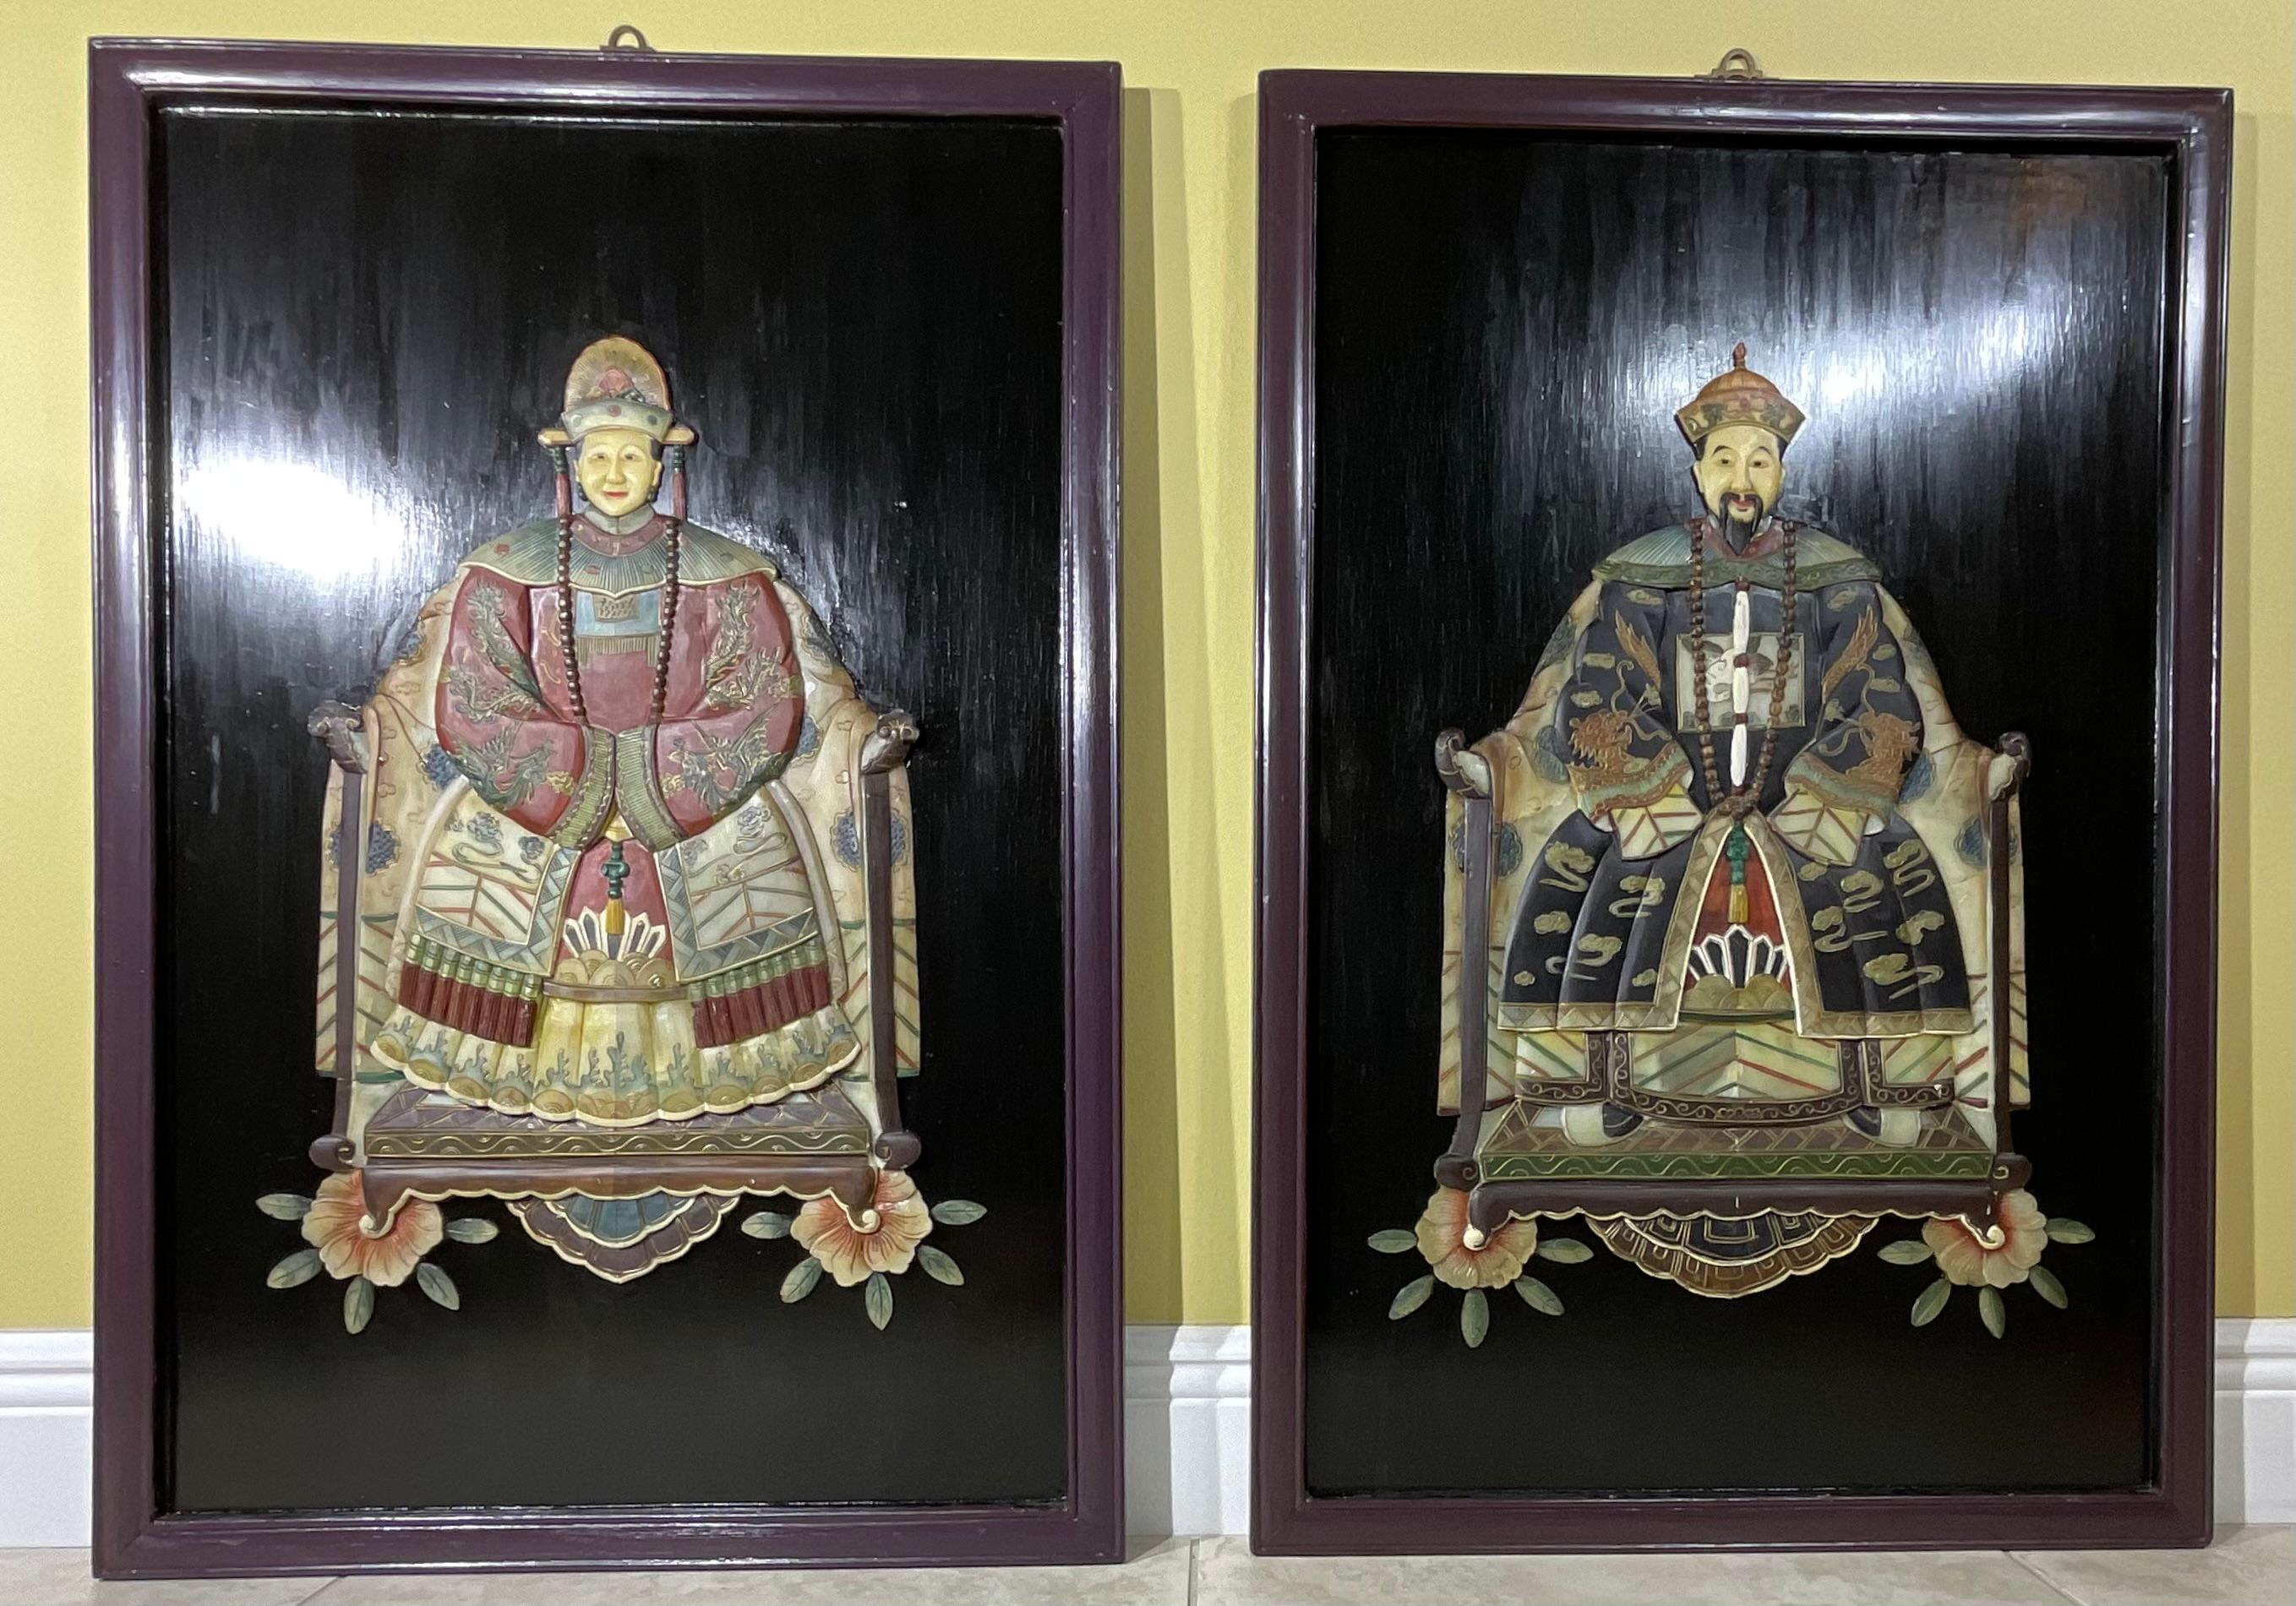 multi dimensional hand carved and hand painted wall hanging Depicting a Chinese Dynasty Emperor and Empress.  Vivid detailed stone carving of the two looking forward in grace 
Exceptional object of art for wall hanging.